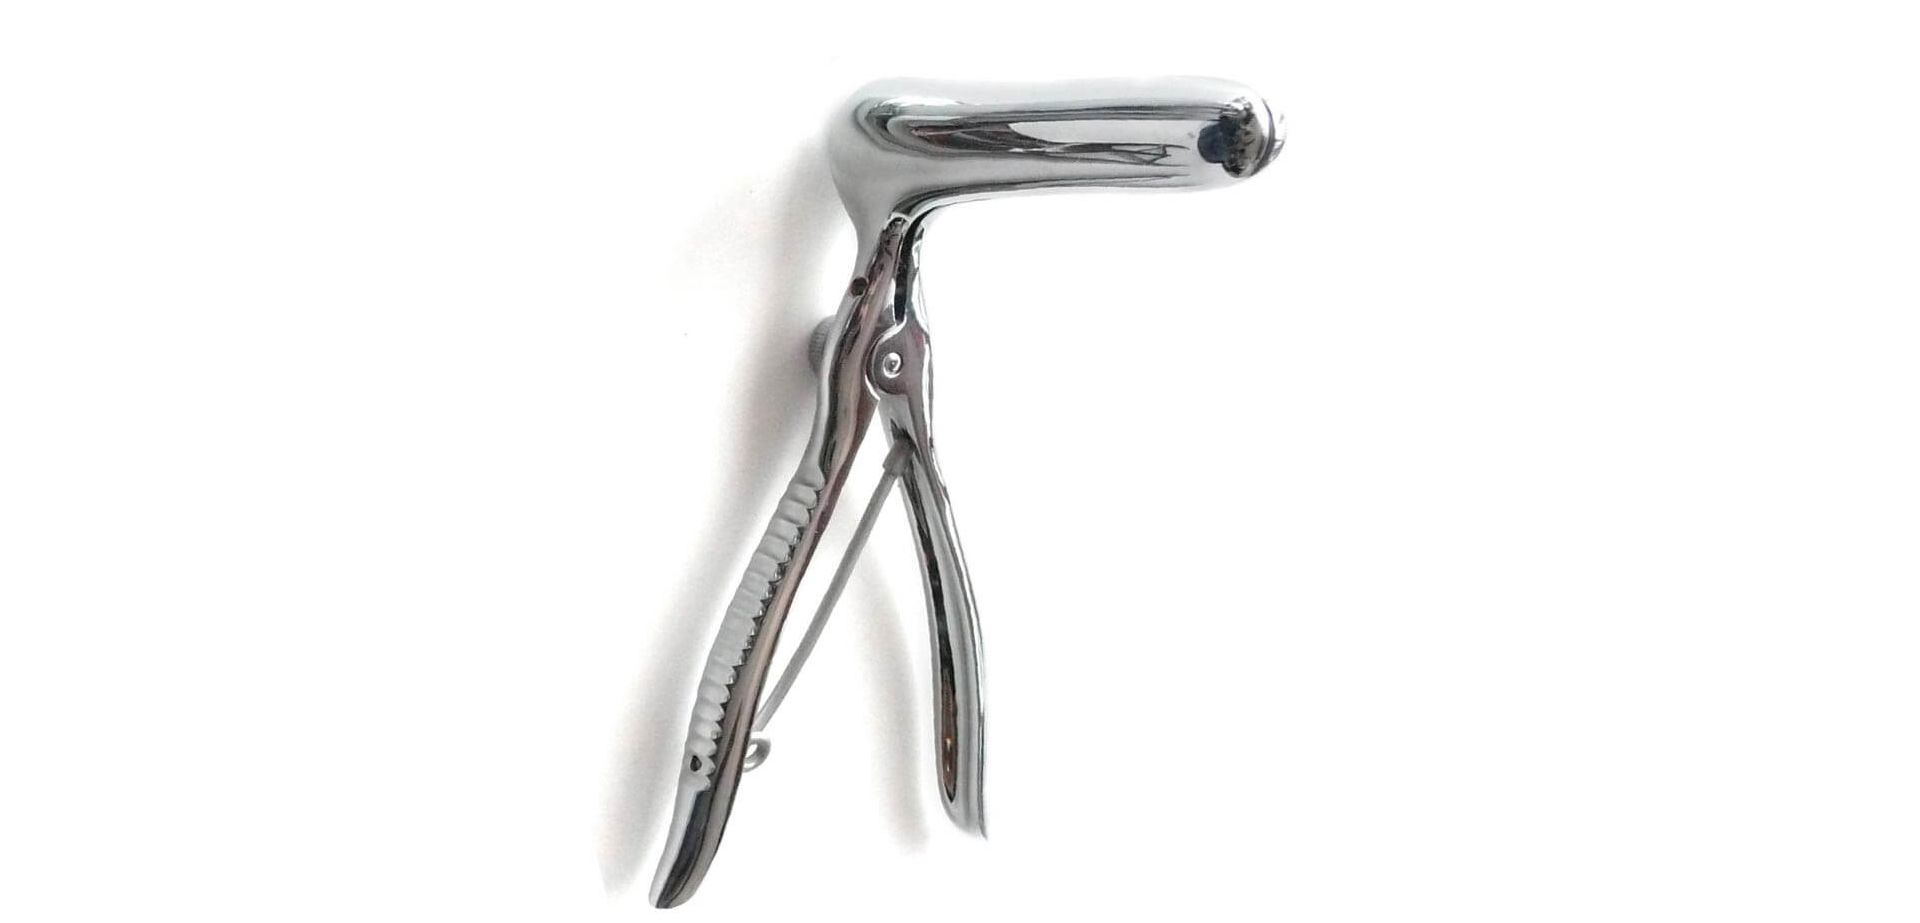 Stainless steel anal speculum.